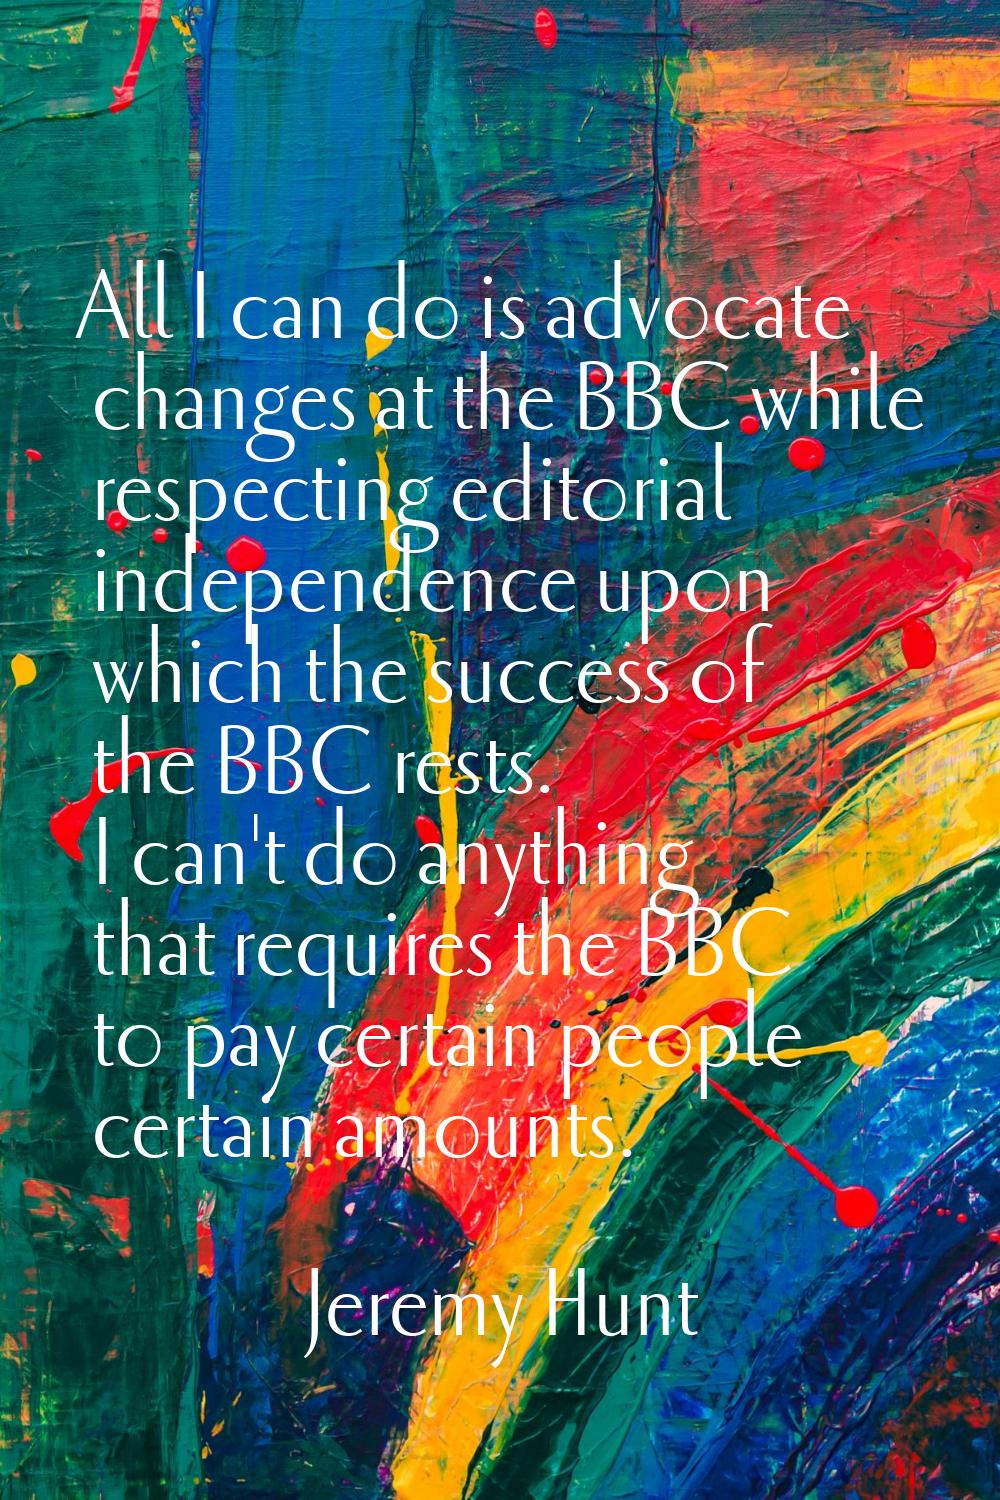 All I can do is advocate changes at the BBC while respecting editorial independence upon which the 